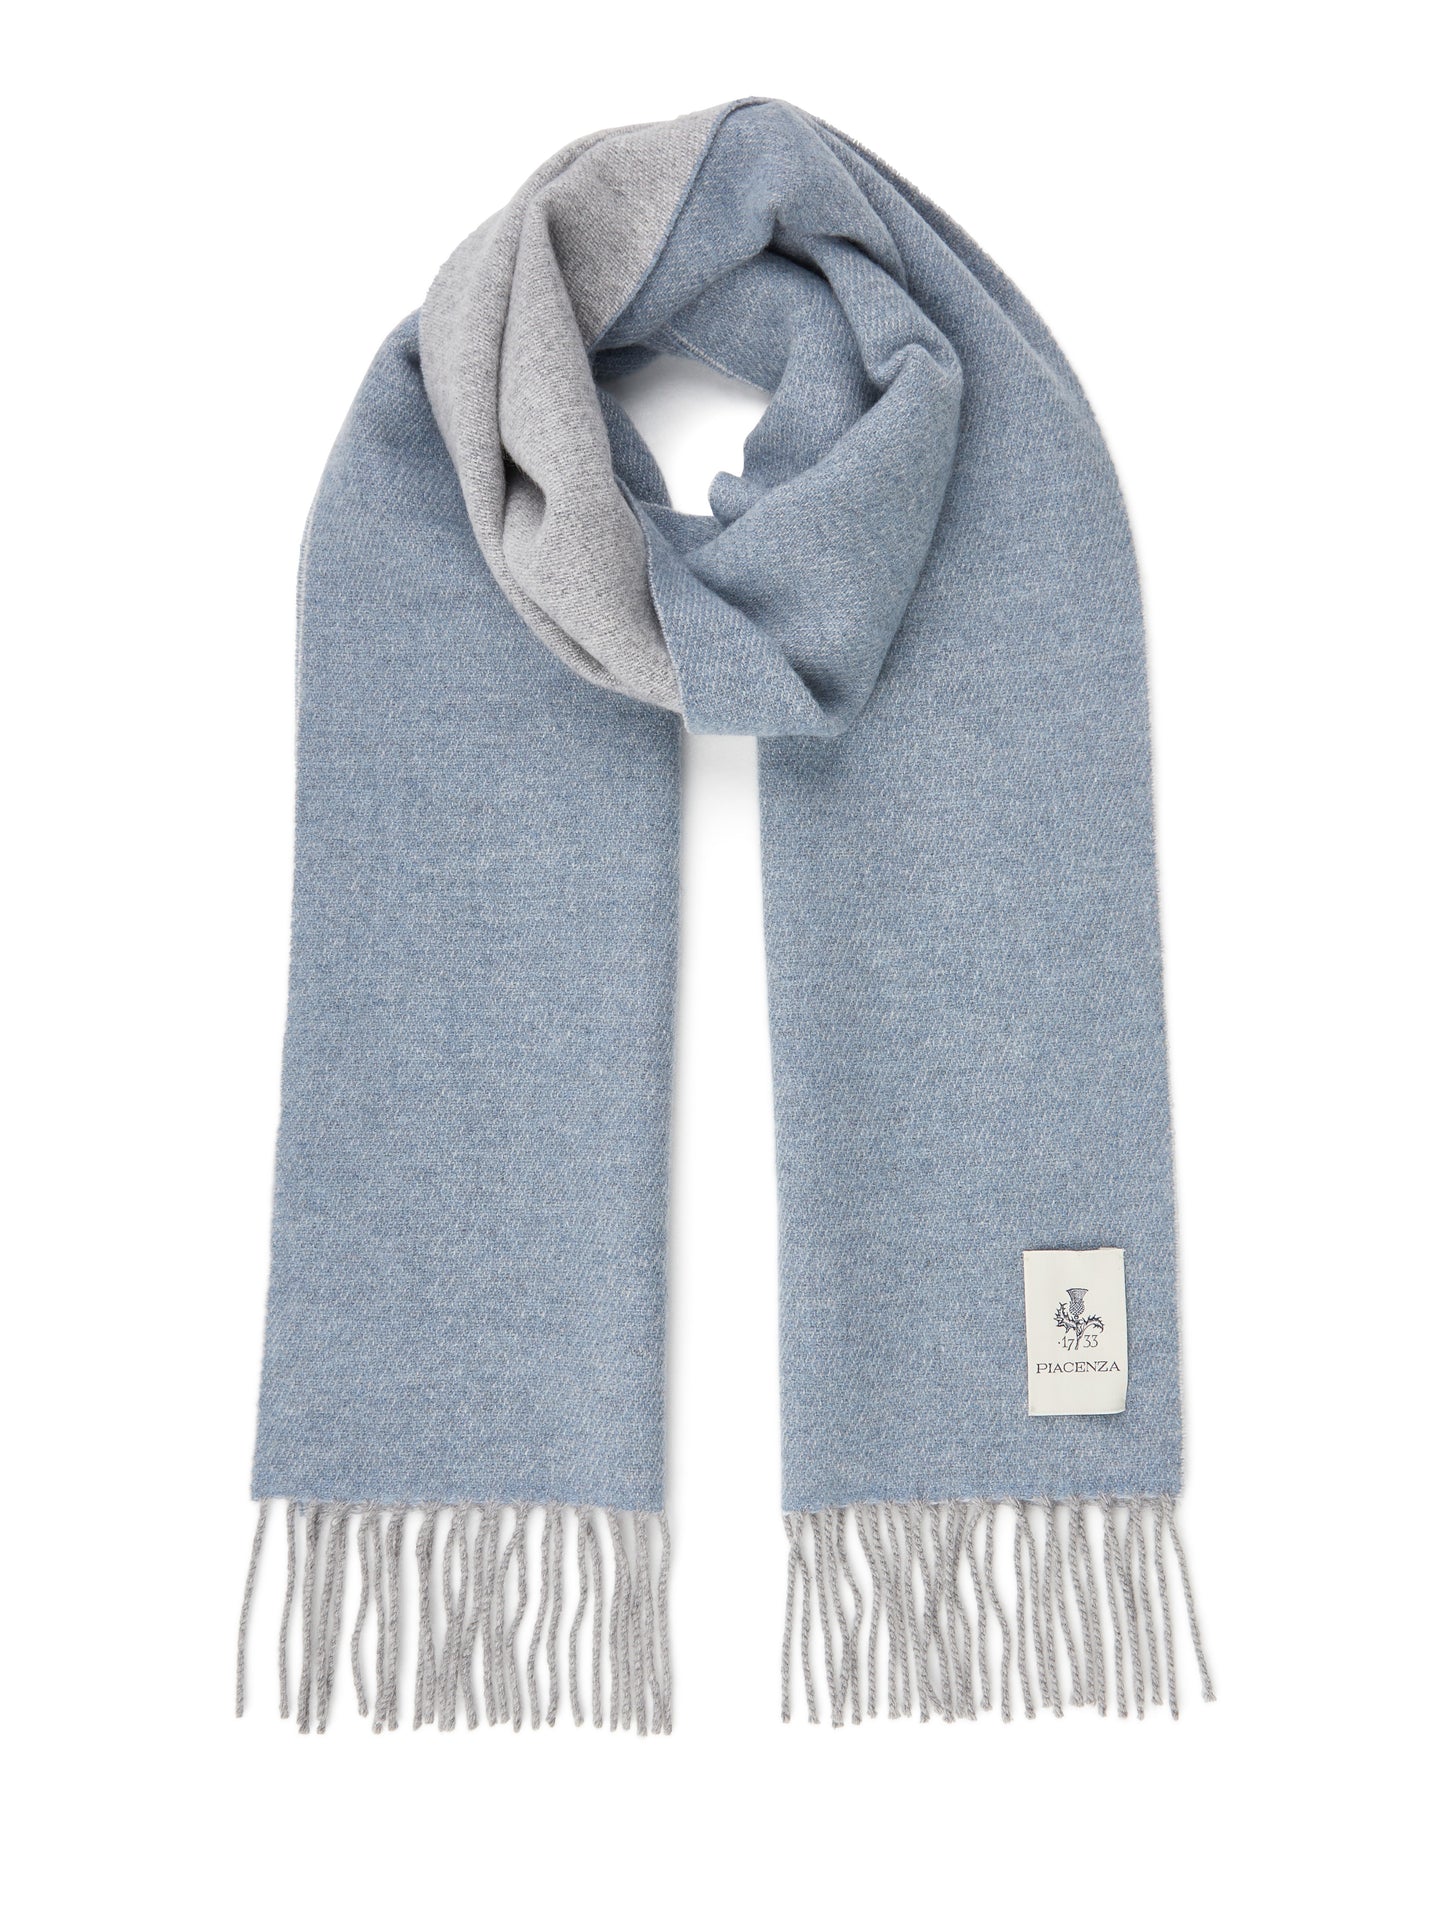 Supreme two-tone blue gray fringed scarf